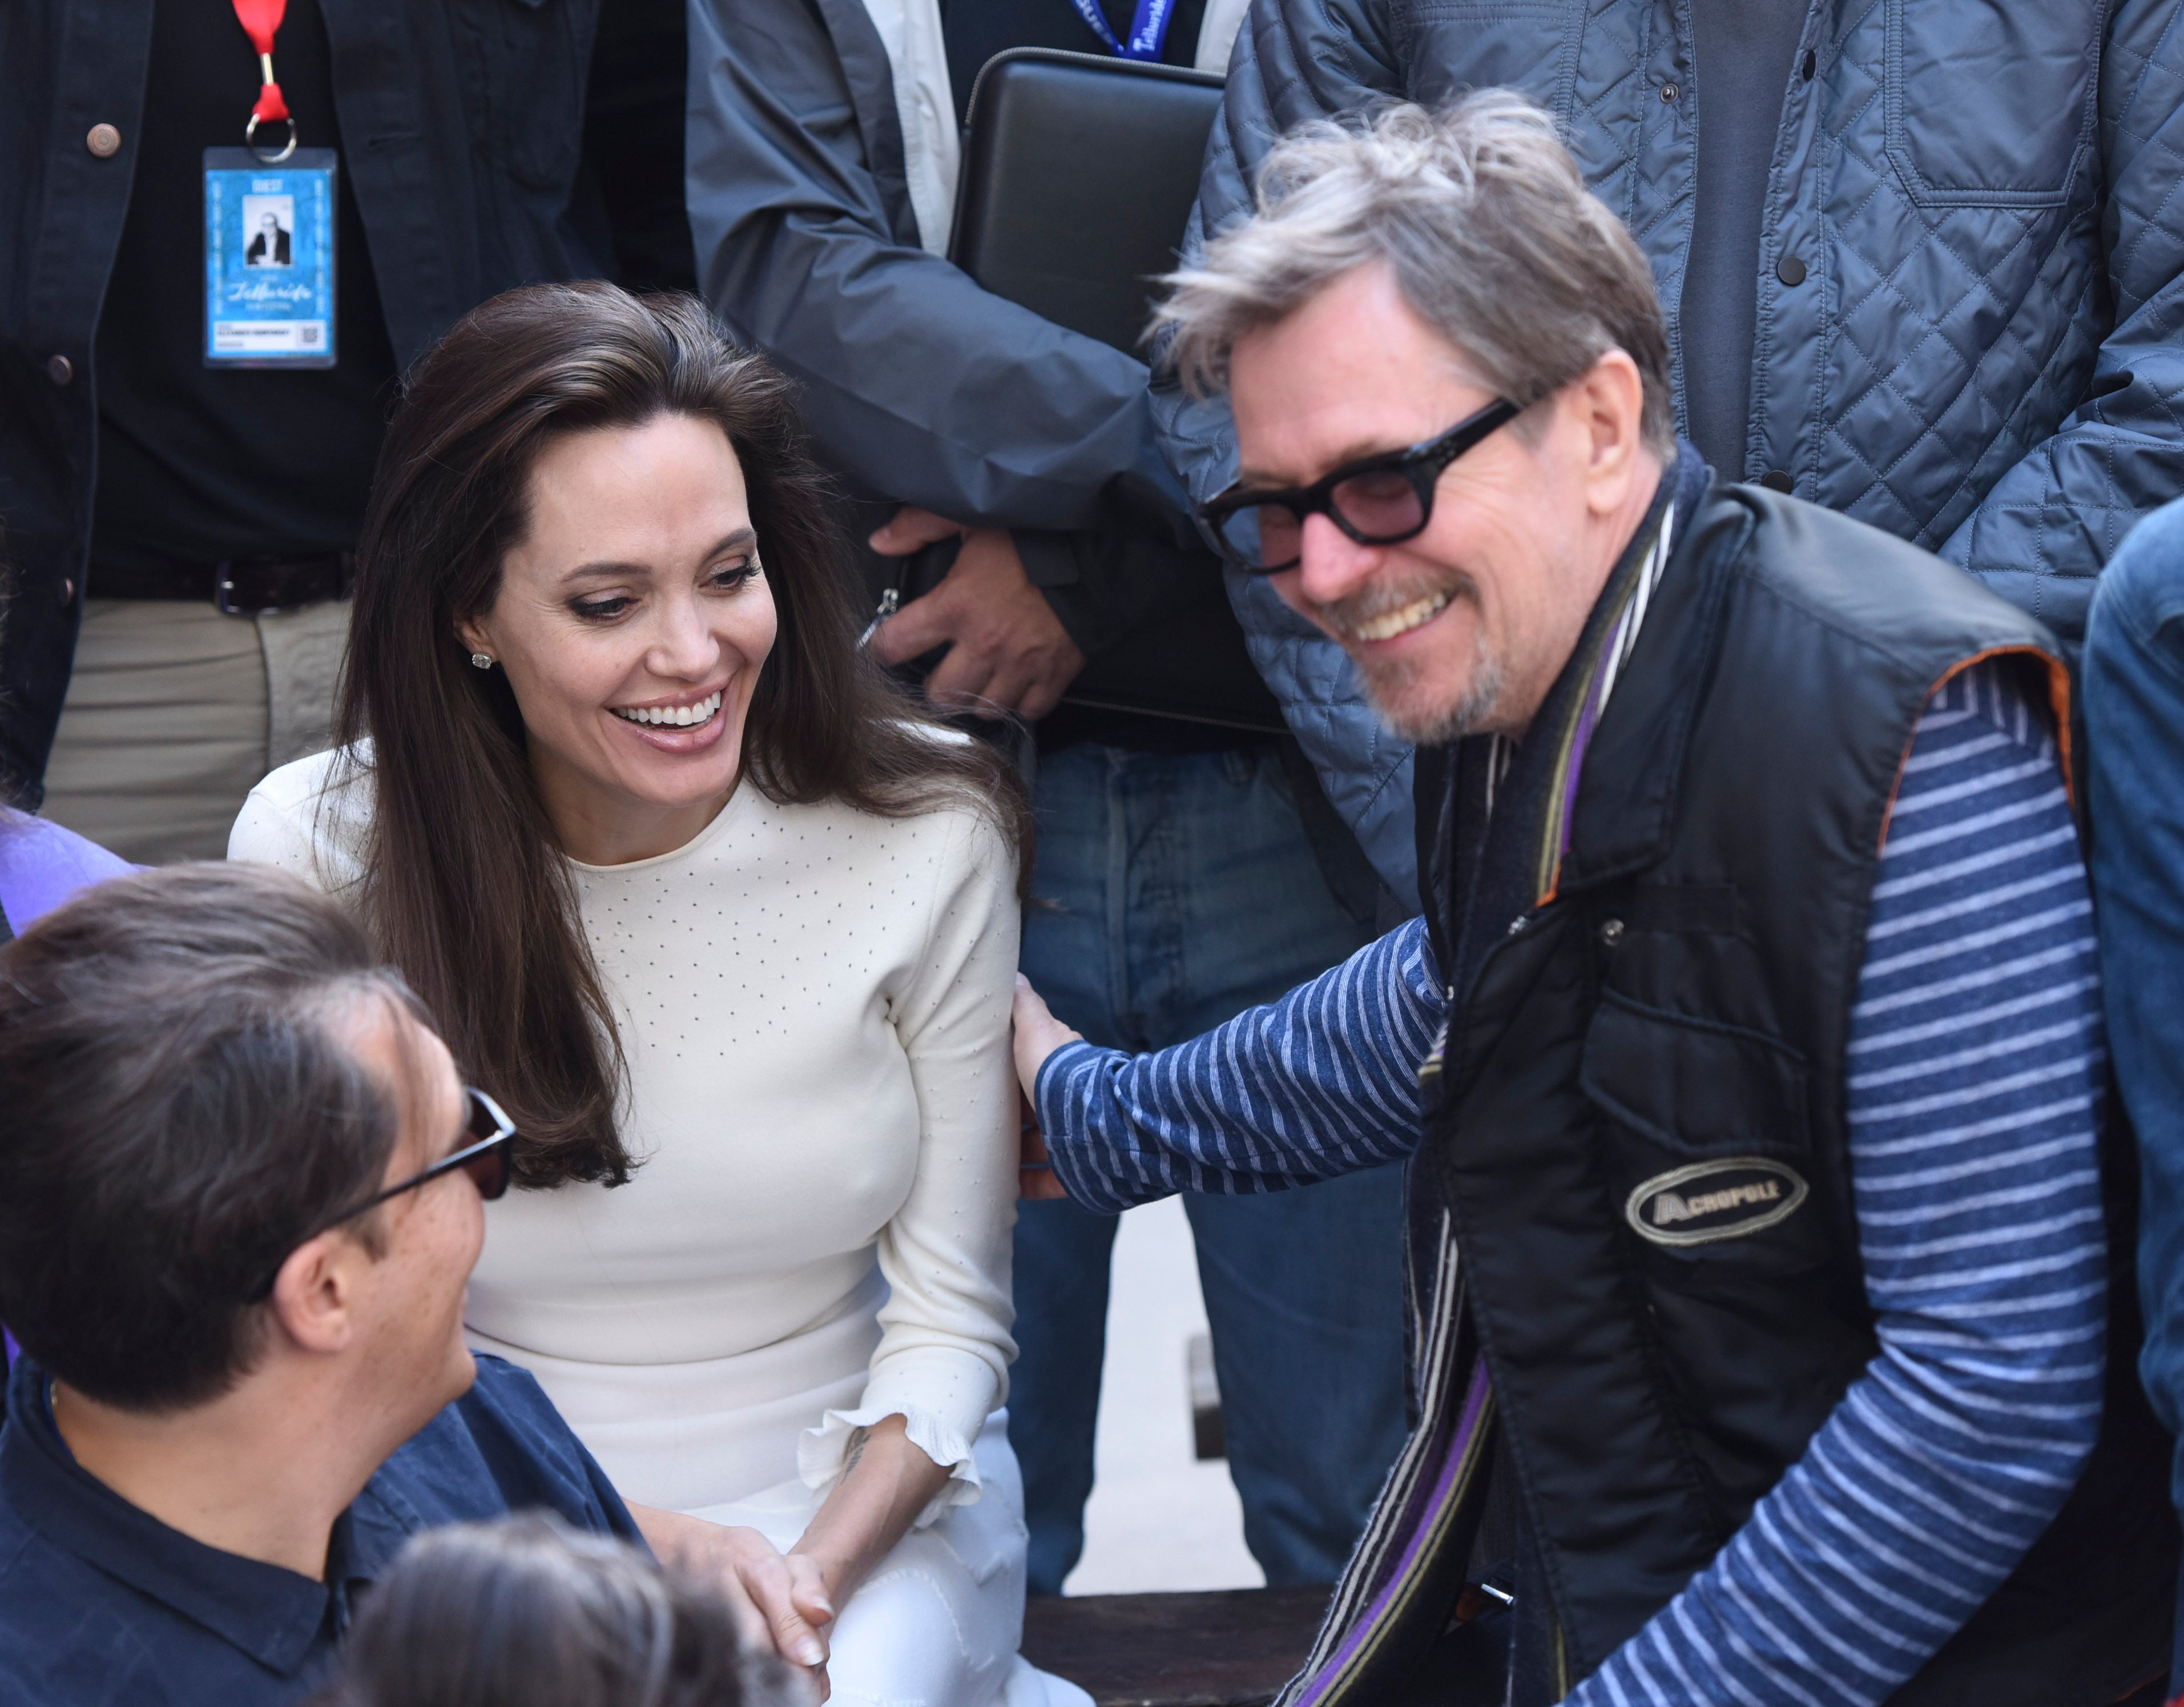 Angelina Jolie Receives Warm Welcome at Telluride Film Festival, Brings Kids on Stage ...3826 x 2990